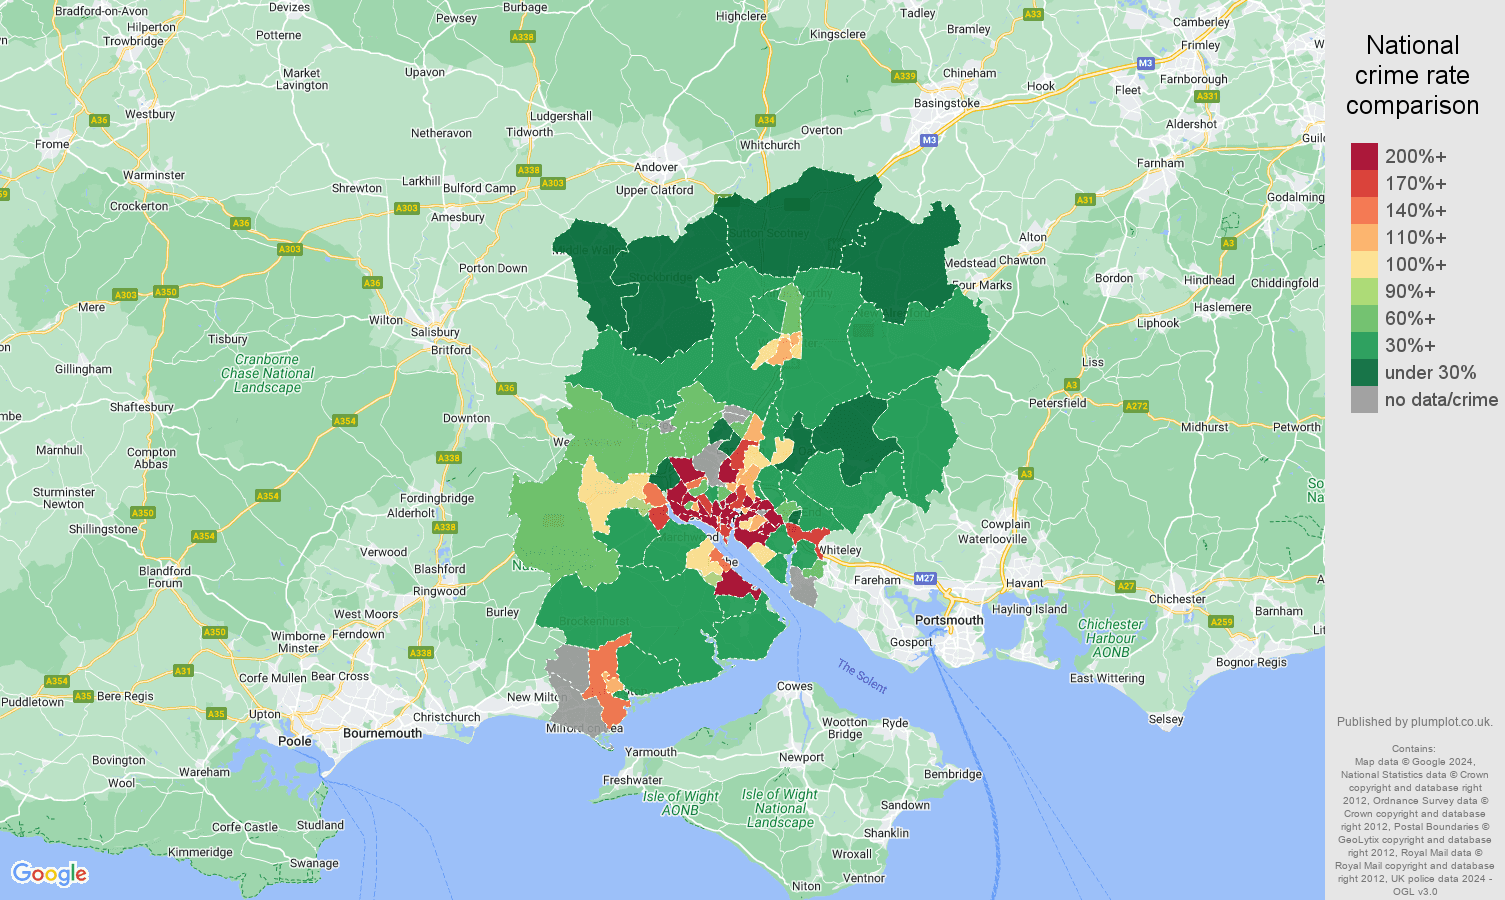 Southampton possession of weapons crime rate comparison map